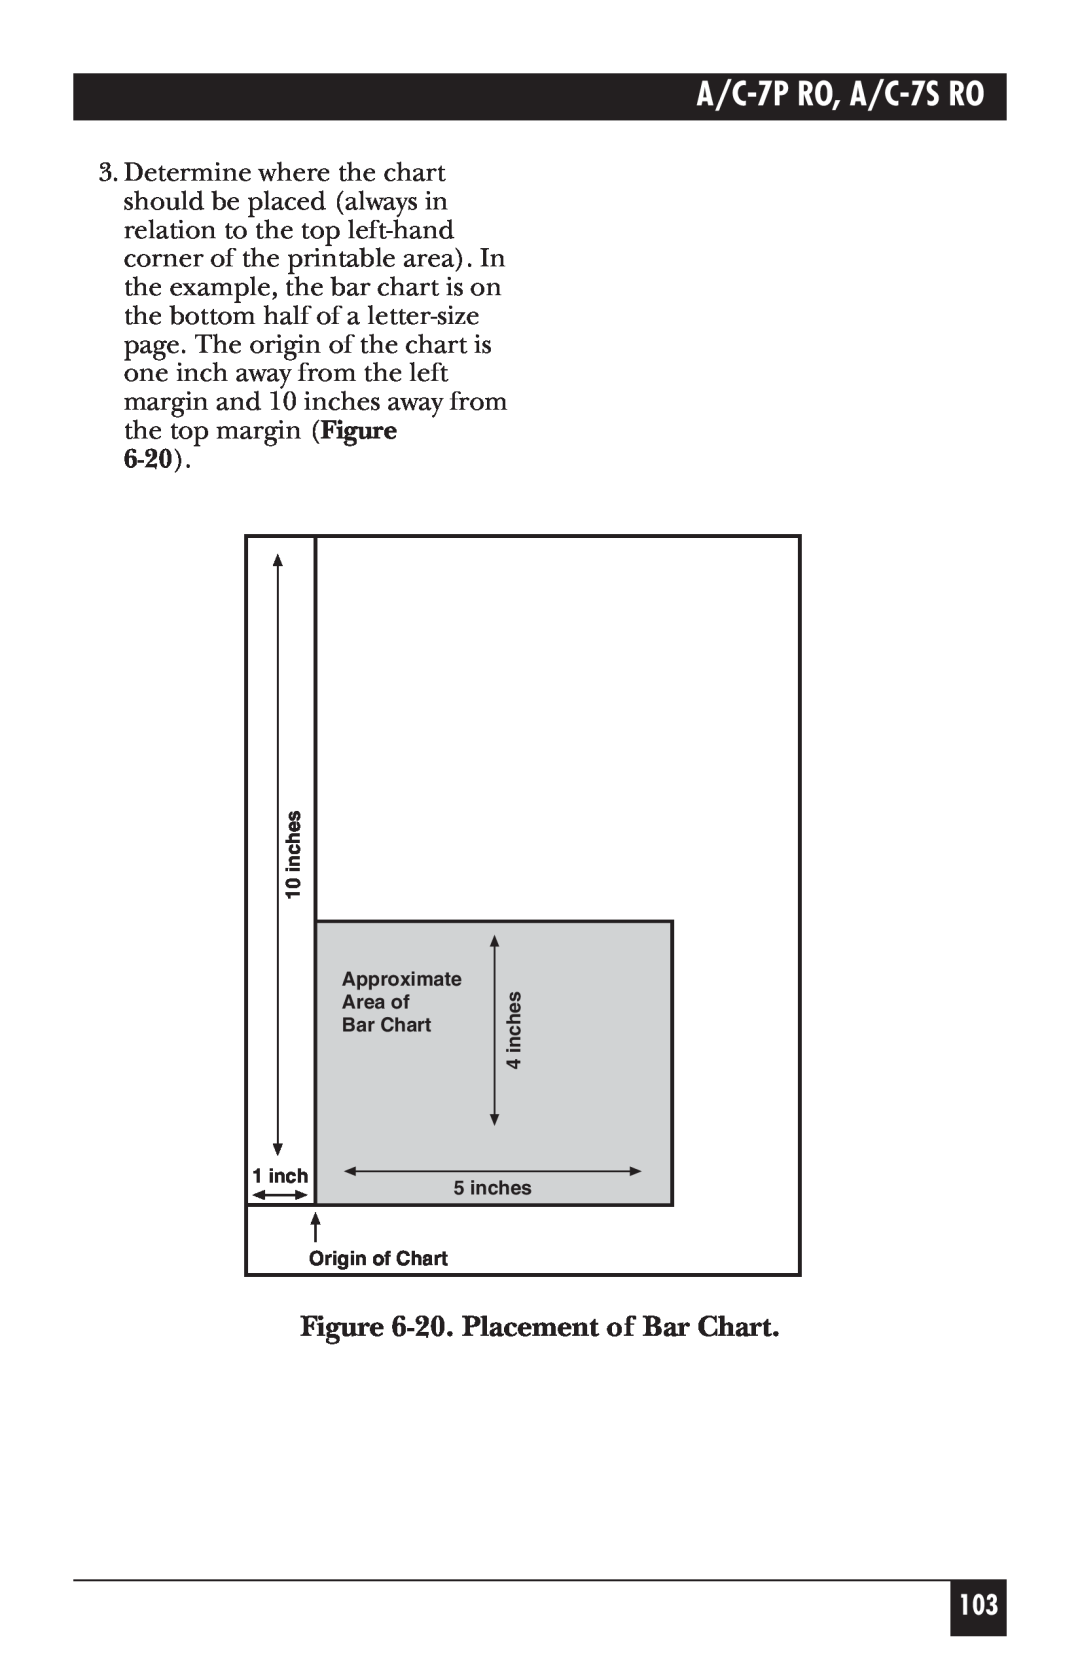 Black Box manual 20. Placement of Bar Chart, 6-20, A/C-7P RO, A/C-7S RO, inches, Approximate, Area of, Origin of Chart 